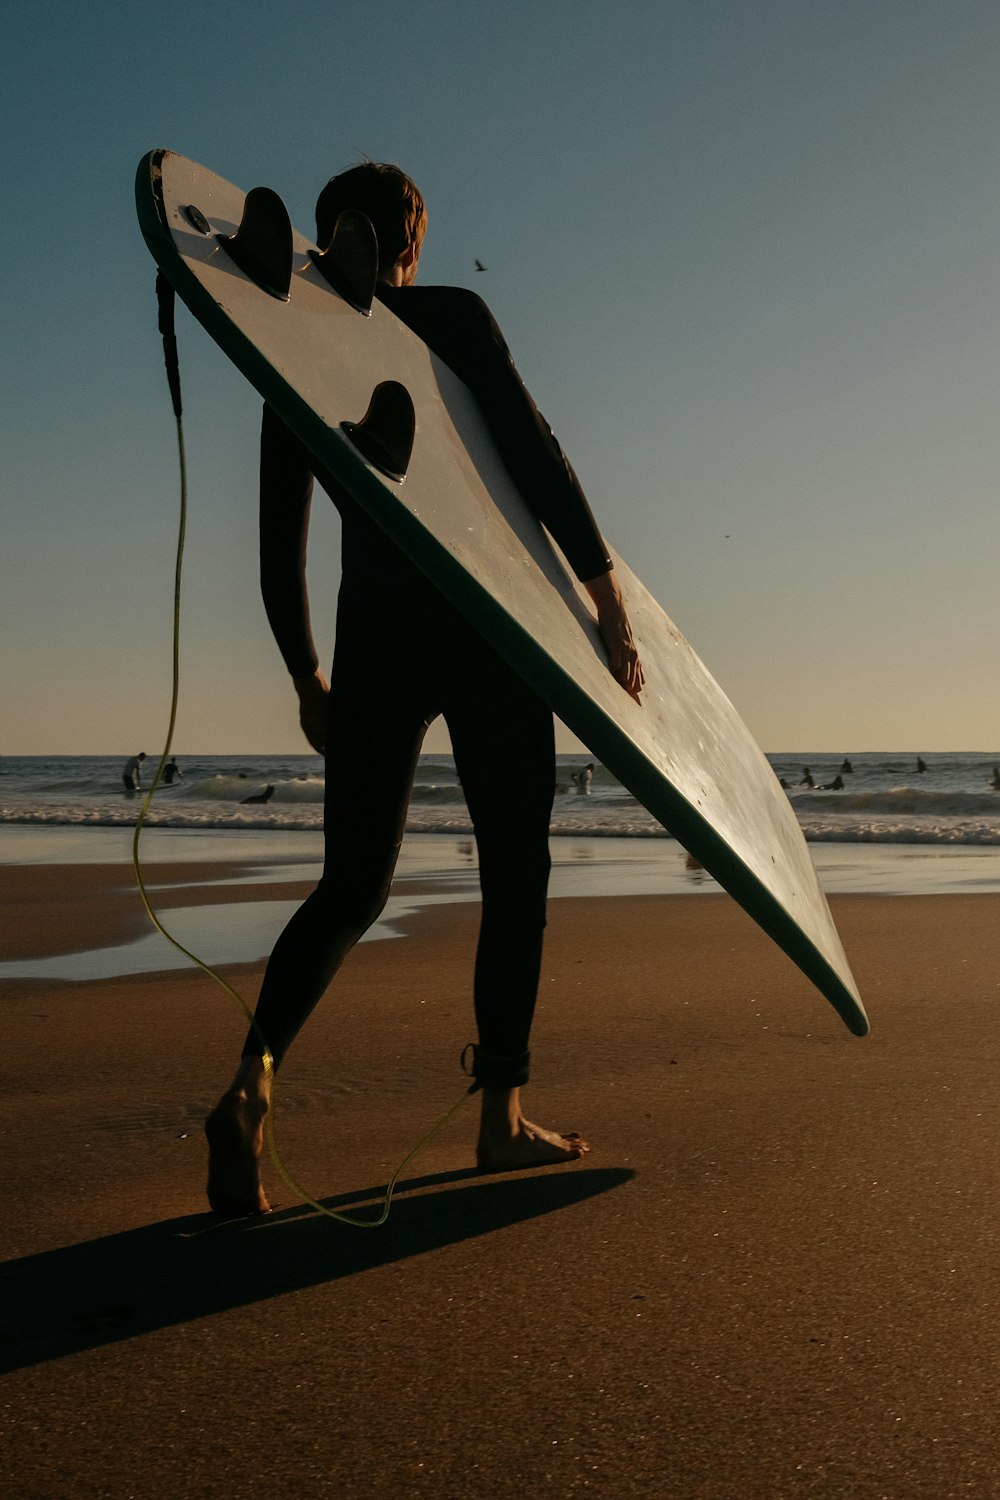 a person holding a surfboard on a beach